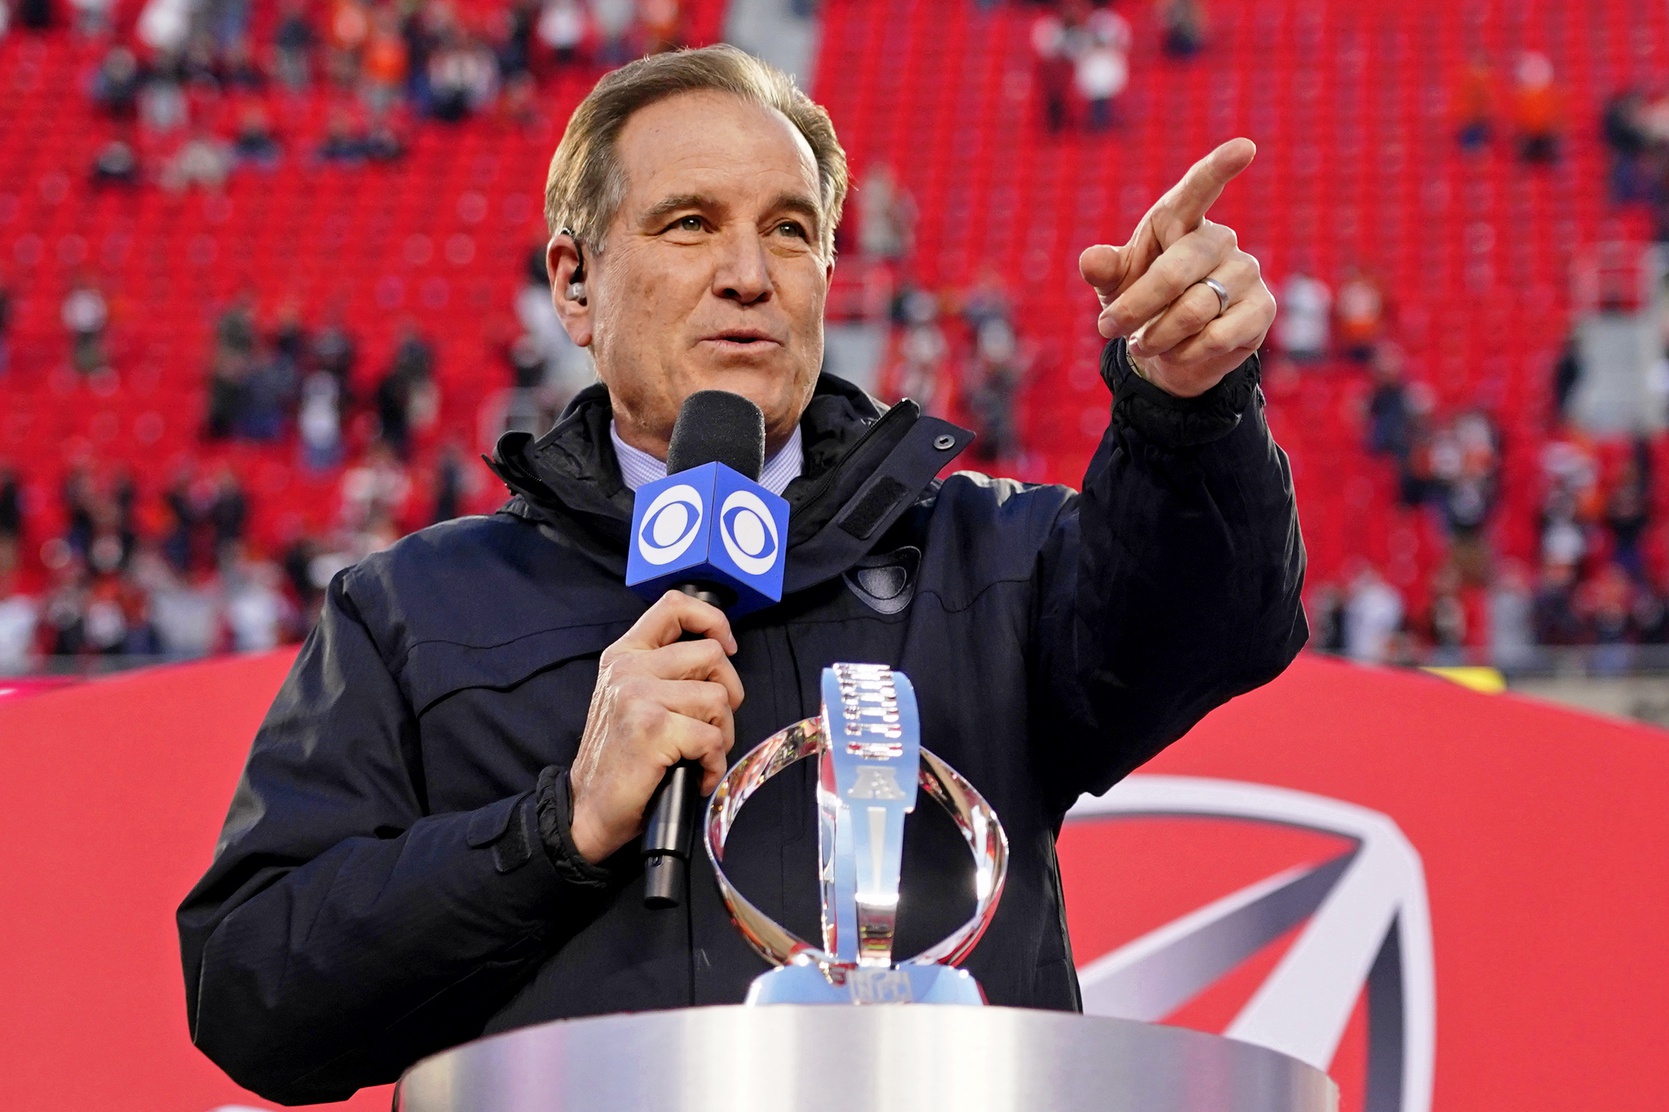 NFL Announcers Week 17: CBS and FOX NFL Game Assignments This Week